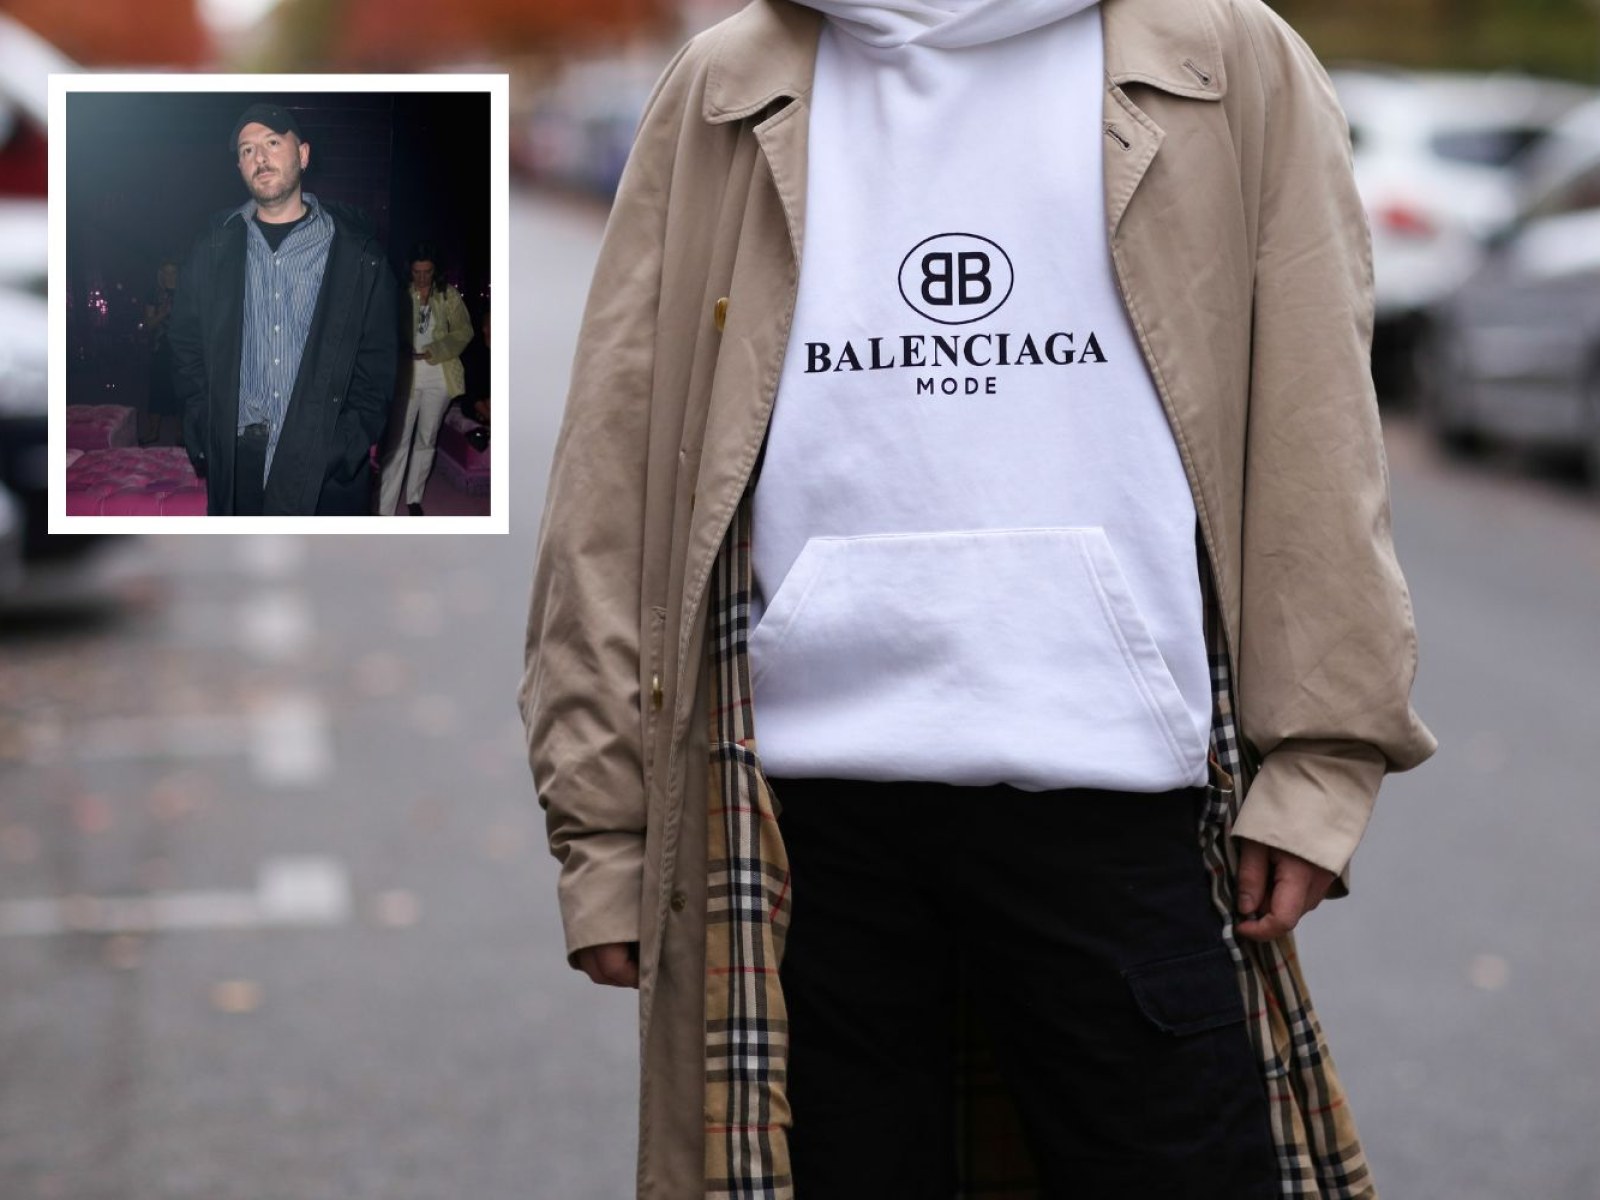 How Will Balenciaga Survive Its Child Abuse Moral Panic Scandal?